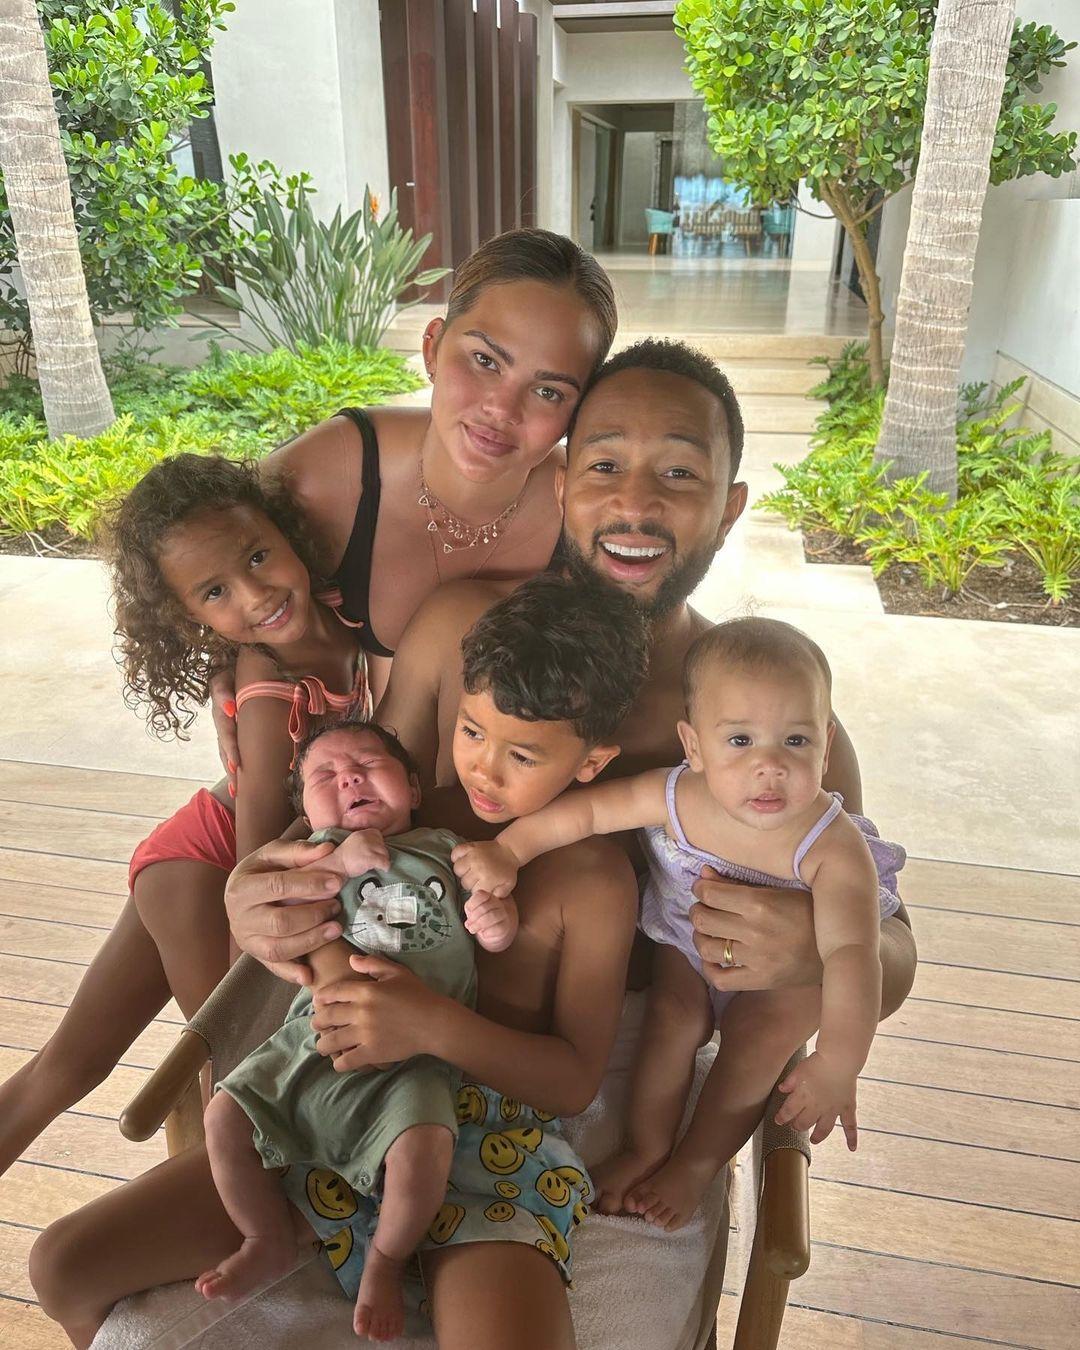 Chrissy Teigen and John Legend on vacation with all four kids